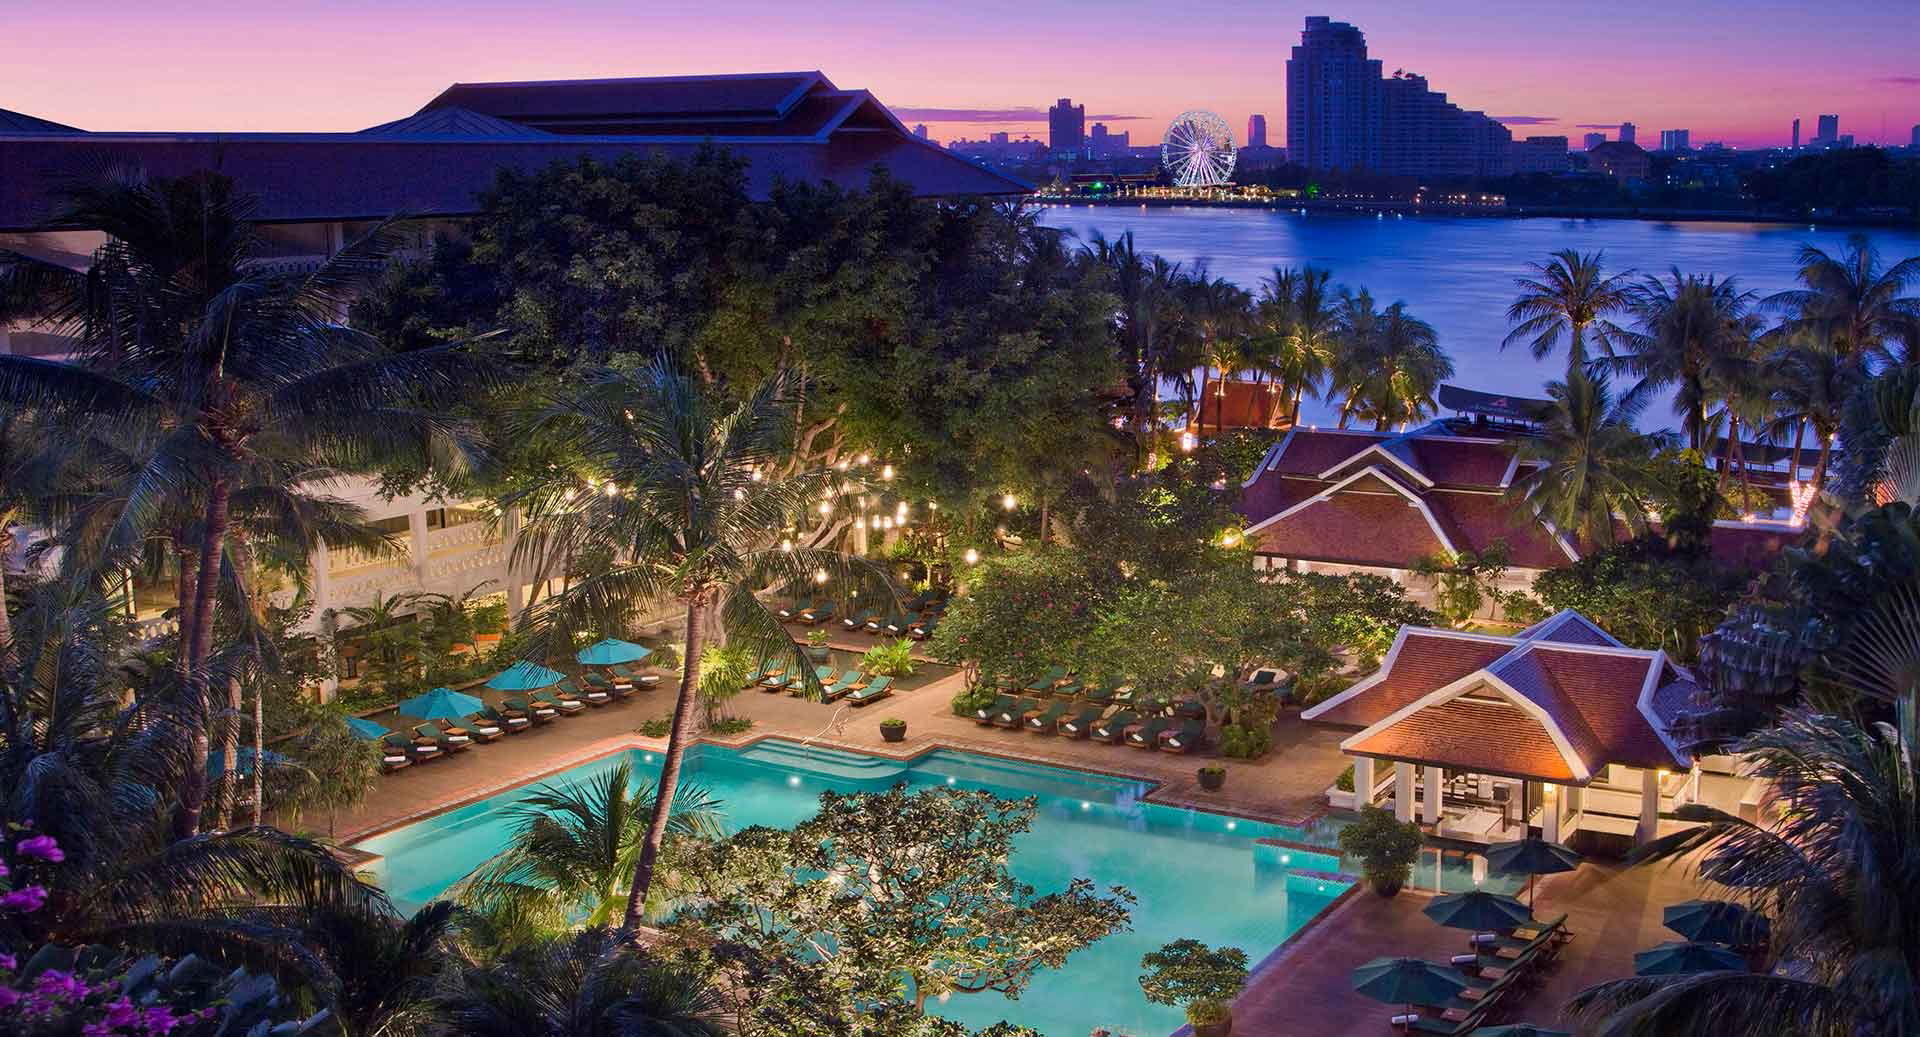 The Anantara Riverside Bangkok - a luxury resort where you can truly forget that you are in the bustling Thai capital, Bangkok. Click to enlarge.